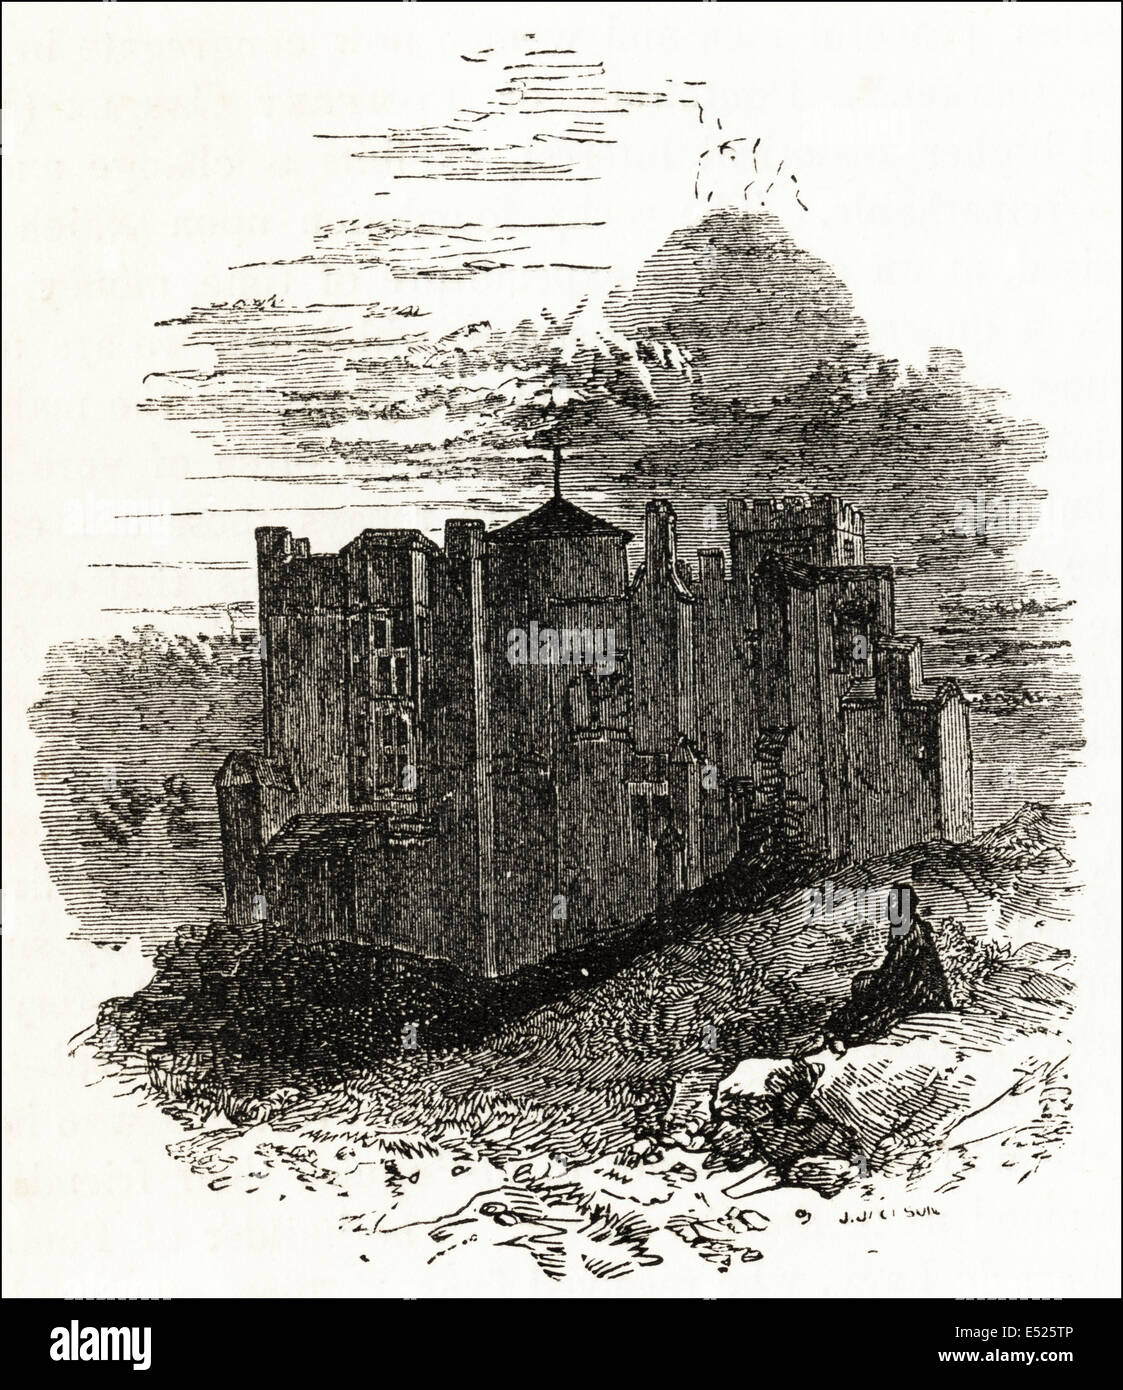 Woodstock Palace,Oxfordshire built in the 12th century and demolished in 1720. Victorian woodcut engraving circa 1845. Stock Photo